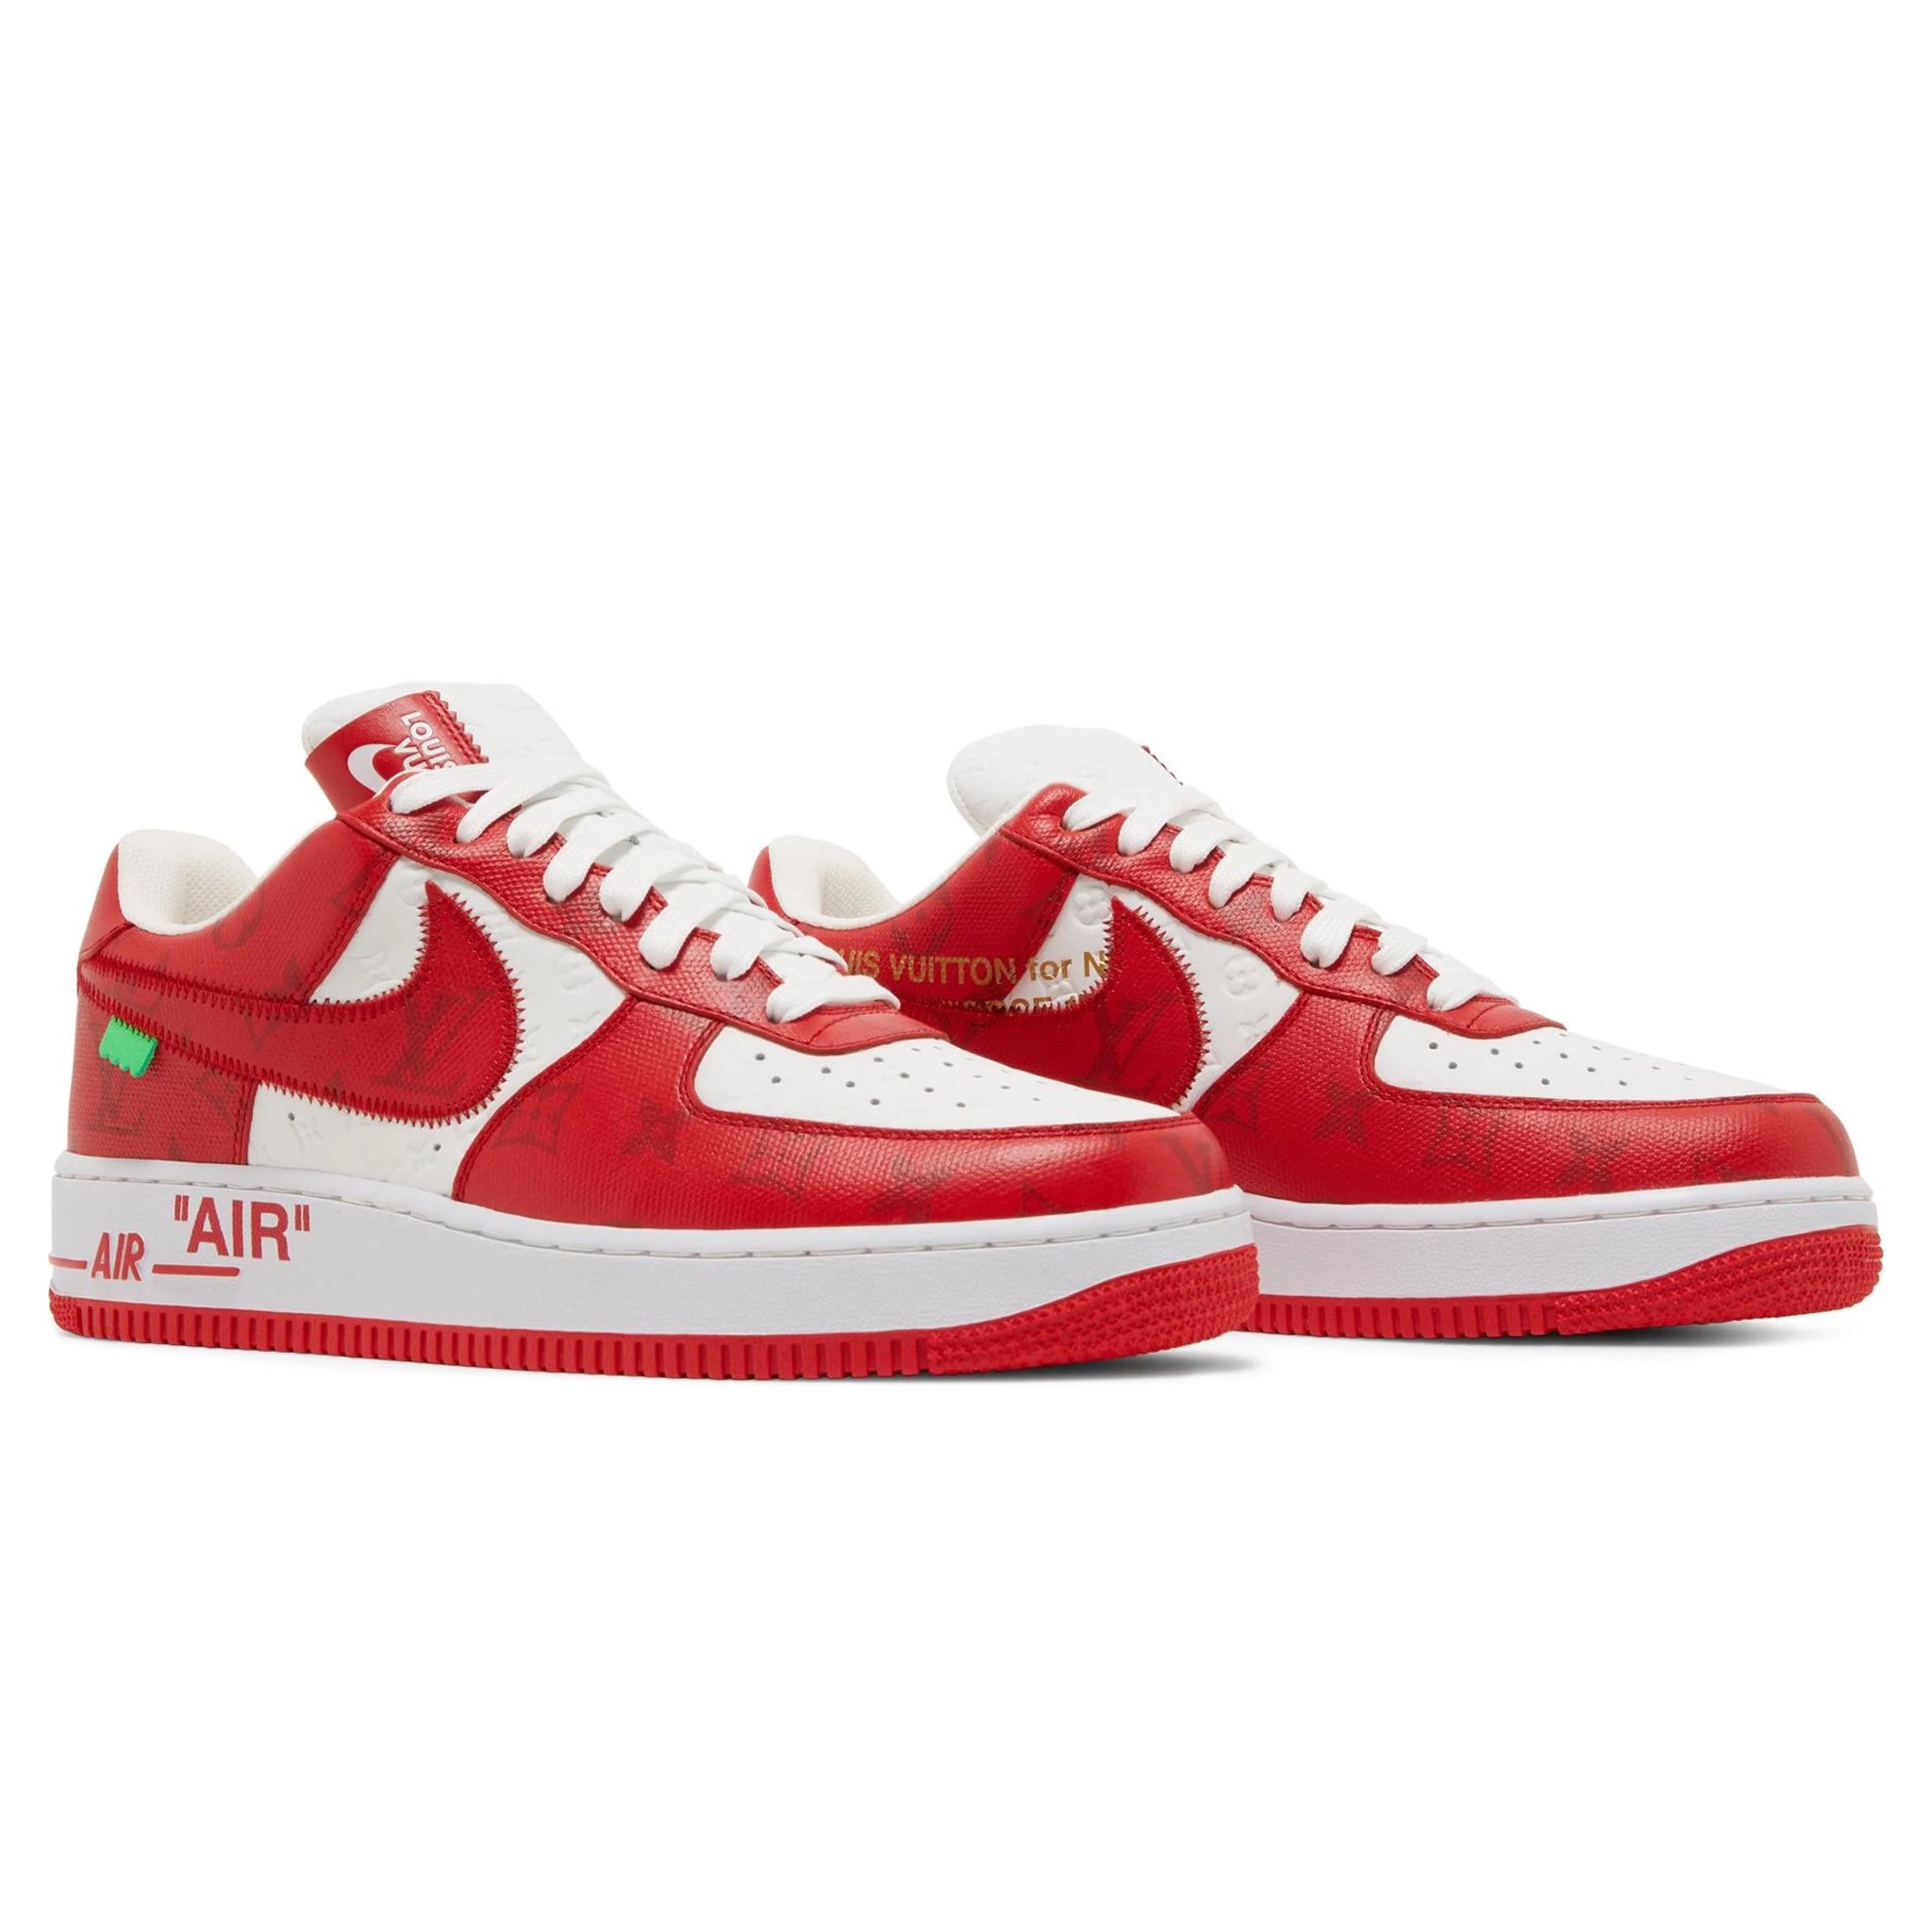 Image of Louis Vuitton x Nike Air Force 1 Low White Red